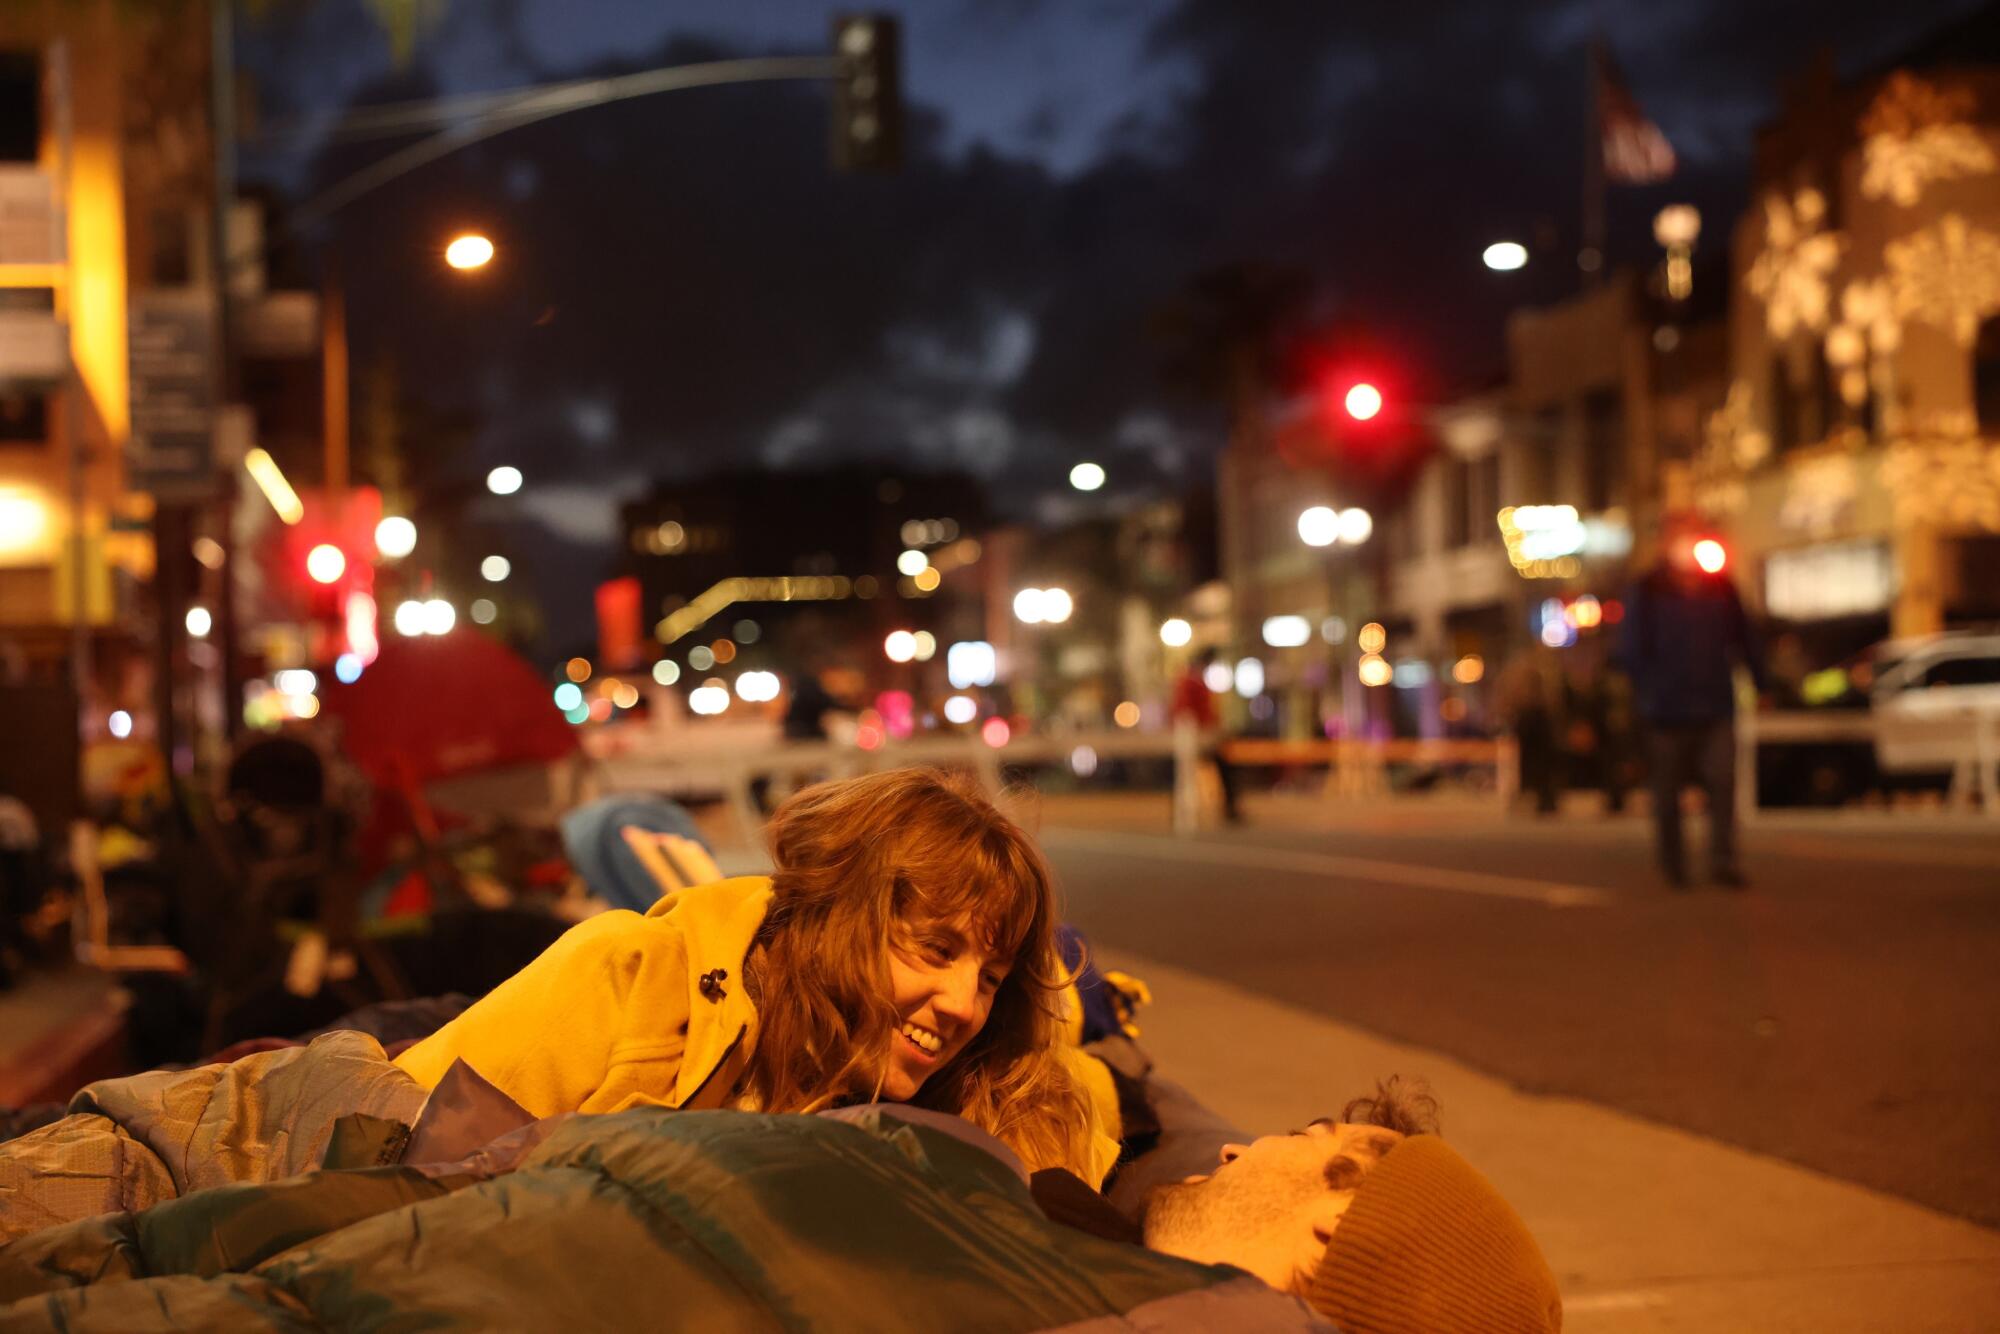 A woman wakes up along the Rose Parade route next to a man.